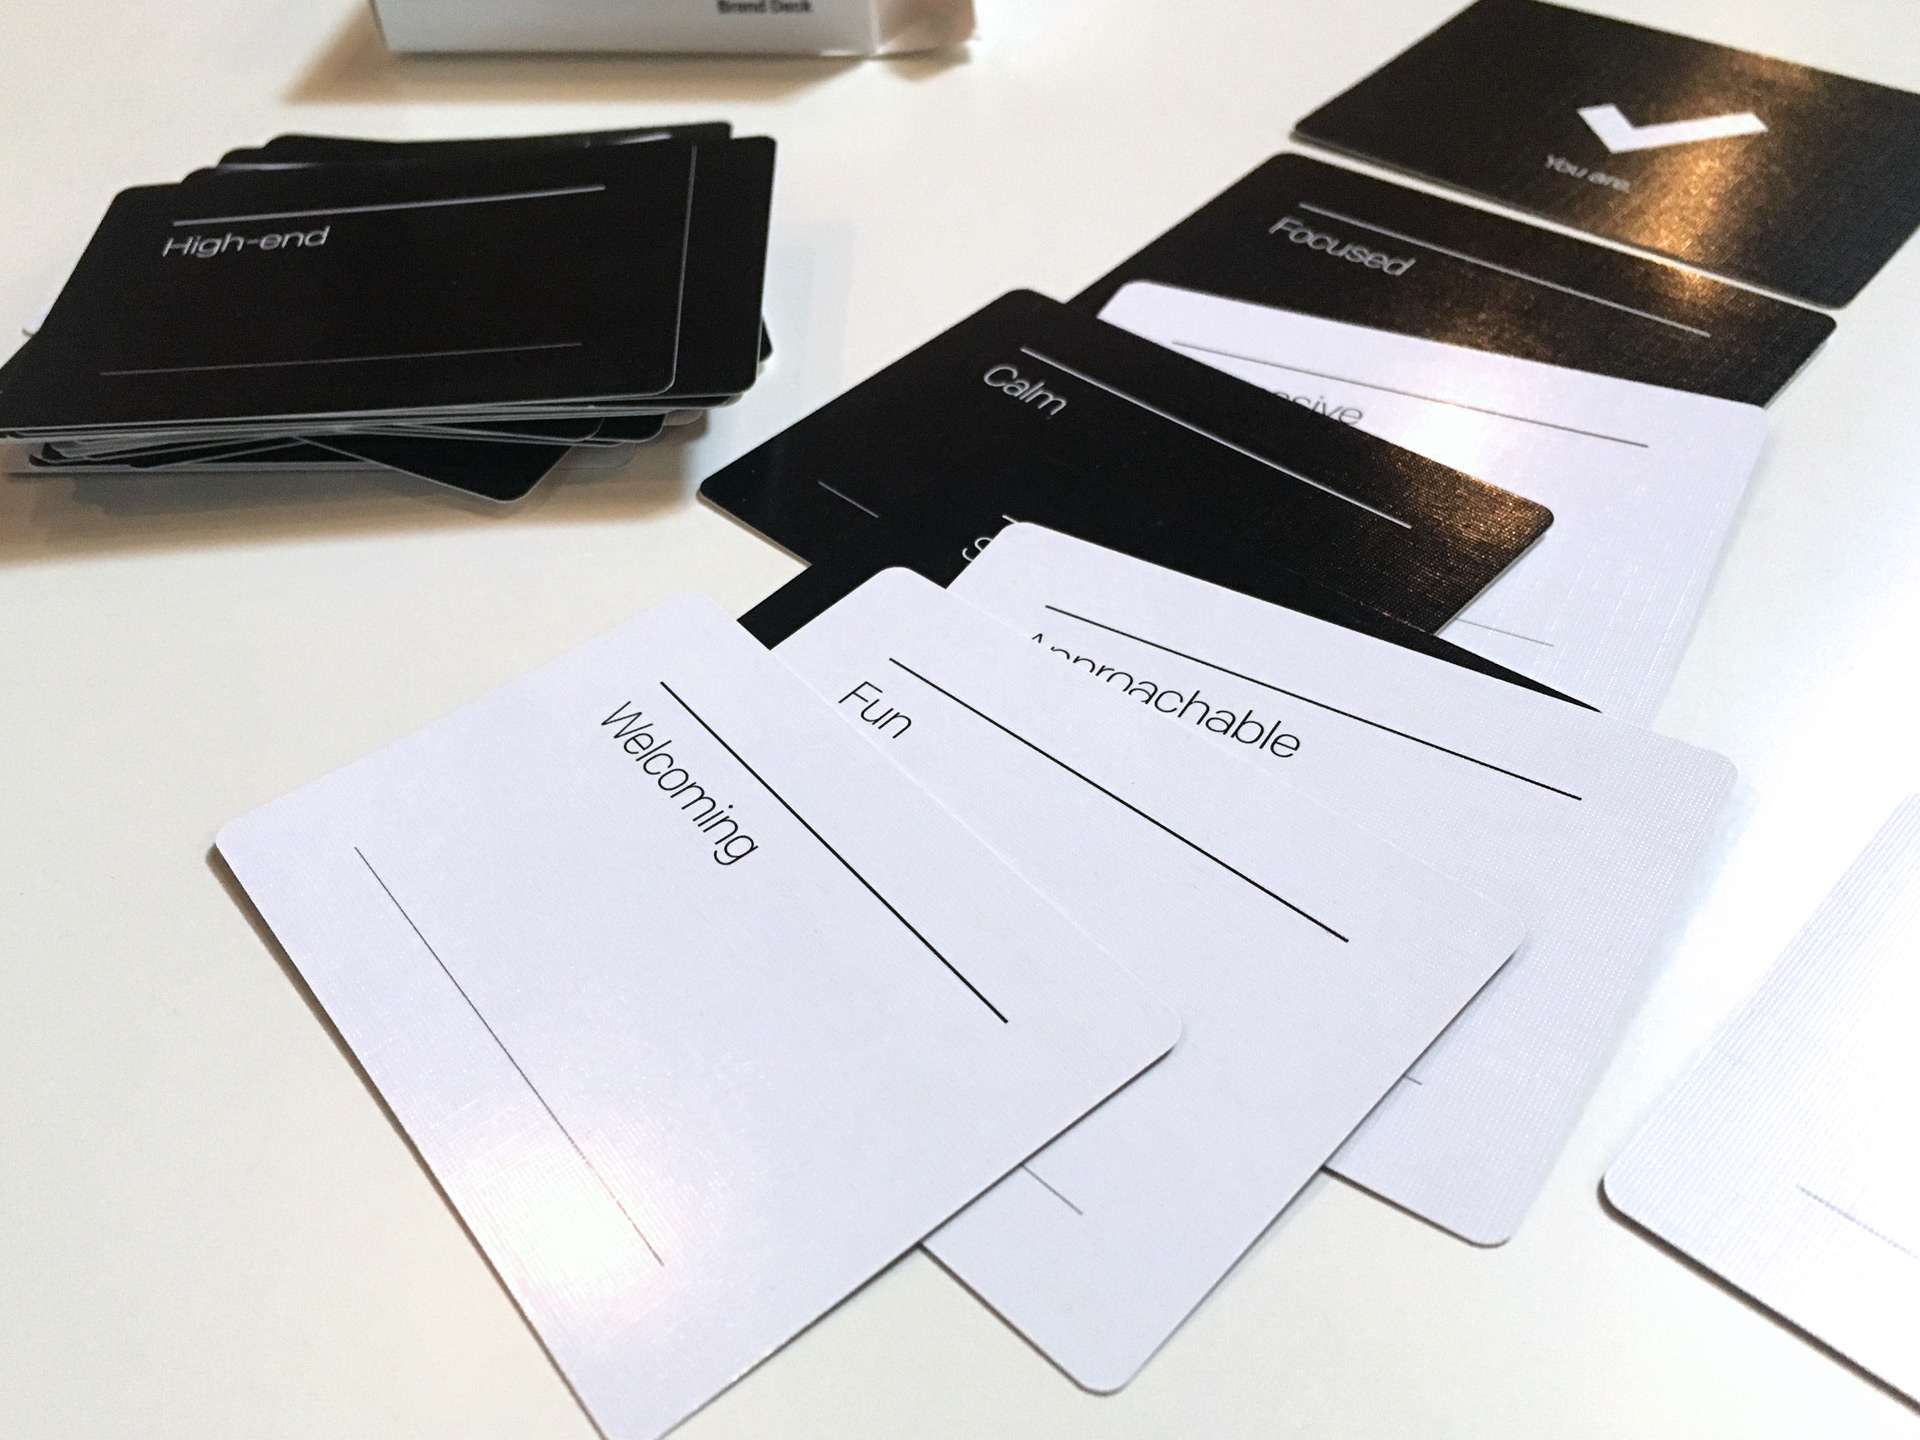 The Brand Deck of Cards designers use in workshops